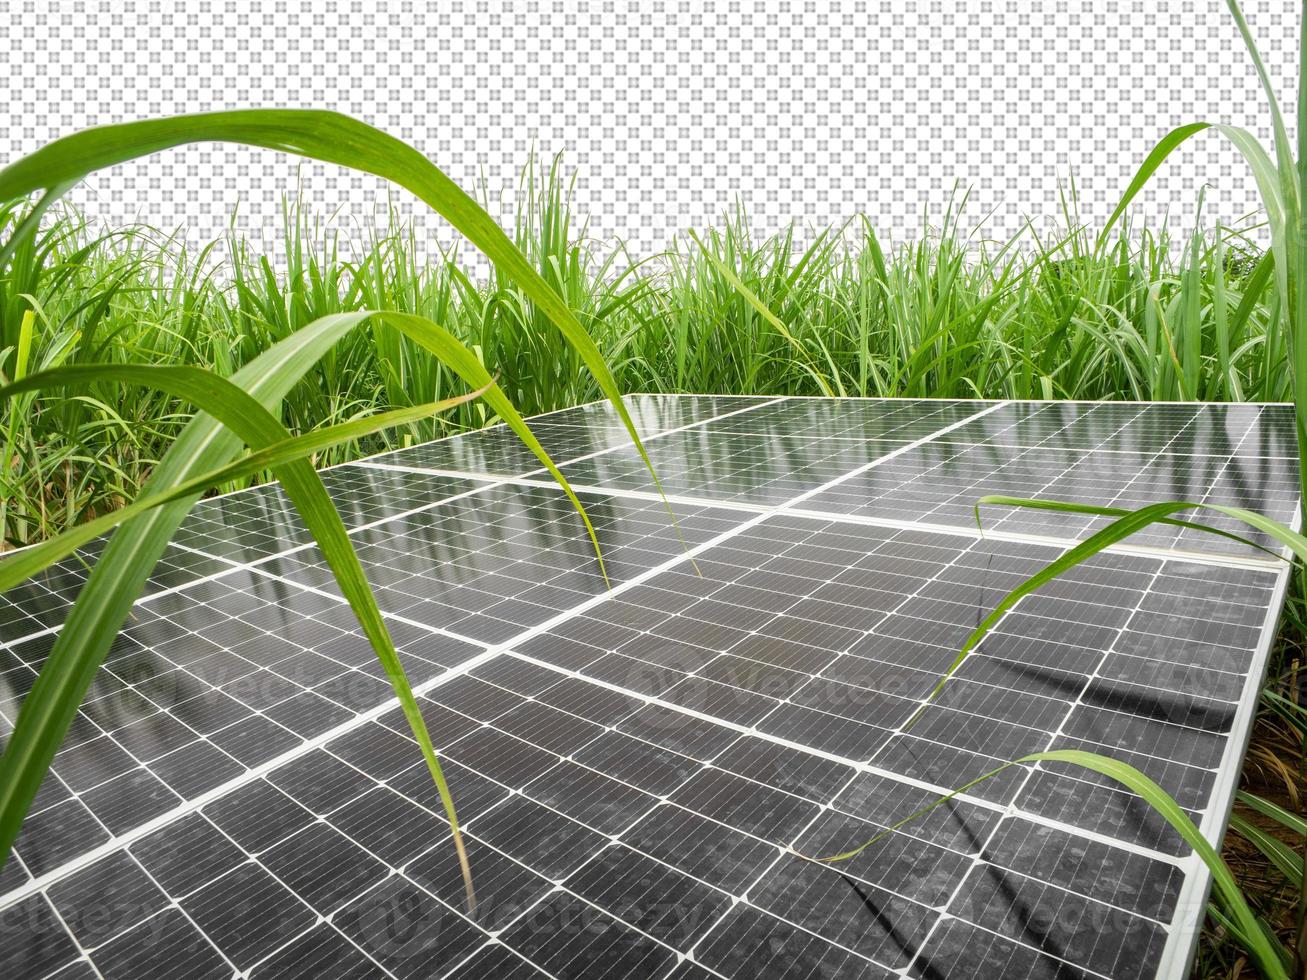 solar cells in Sugar cane, green power, natural energy isolated on transparent background and cliping path photo